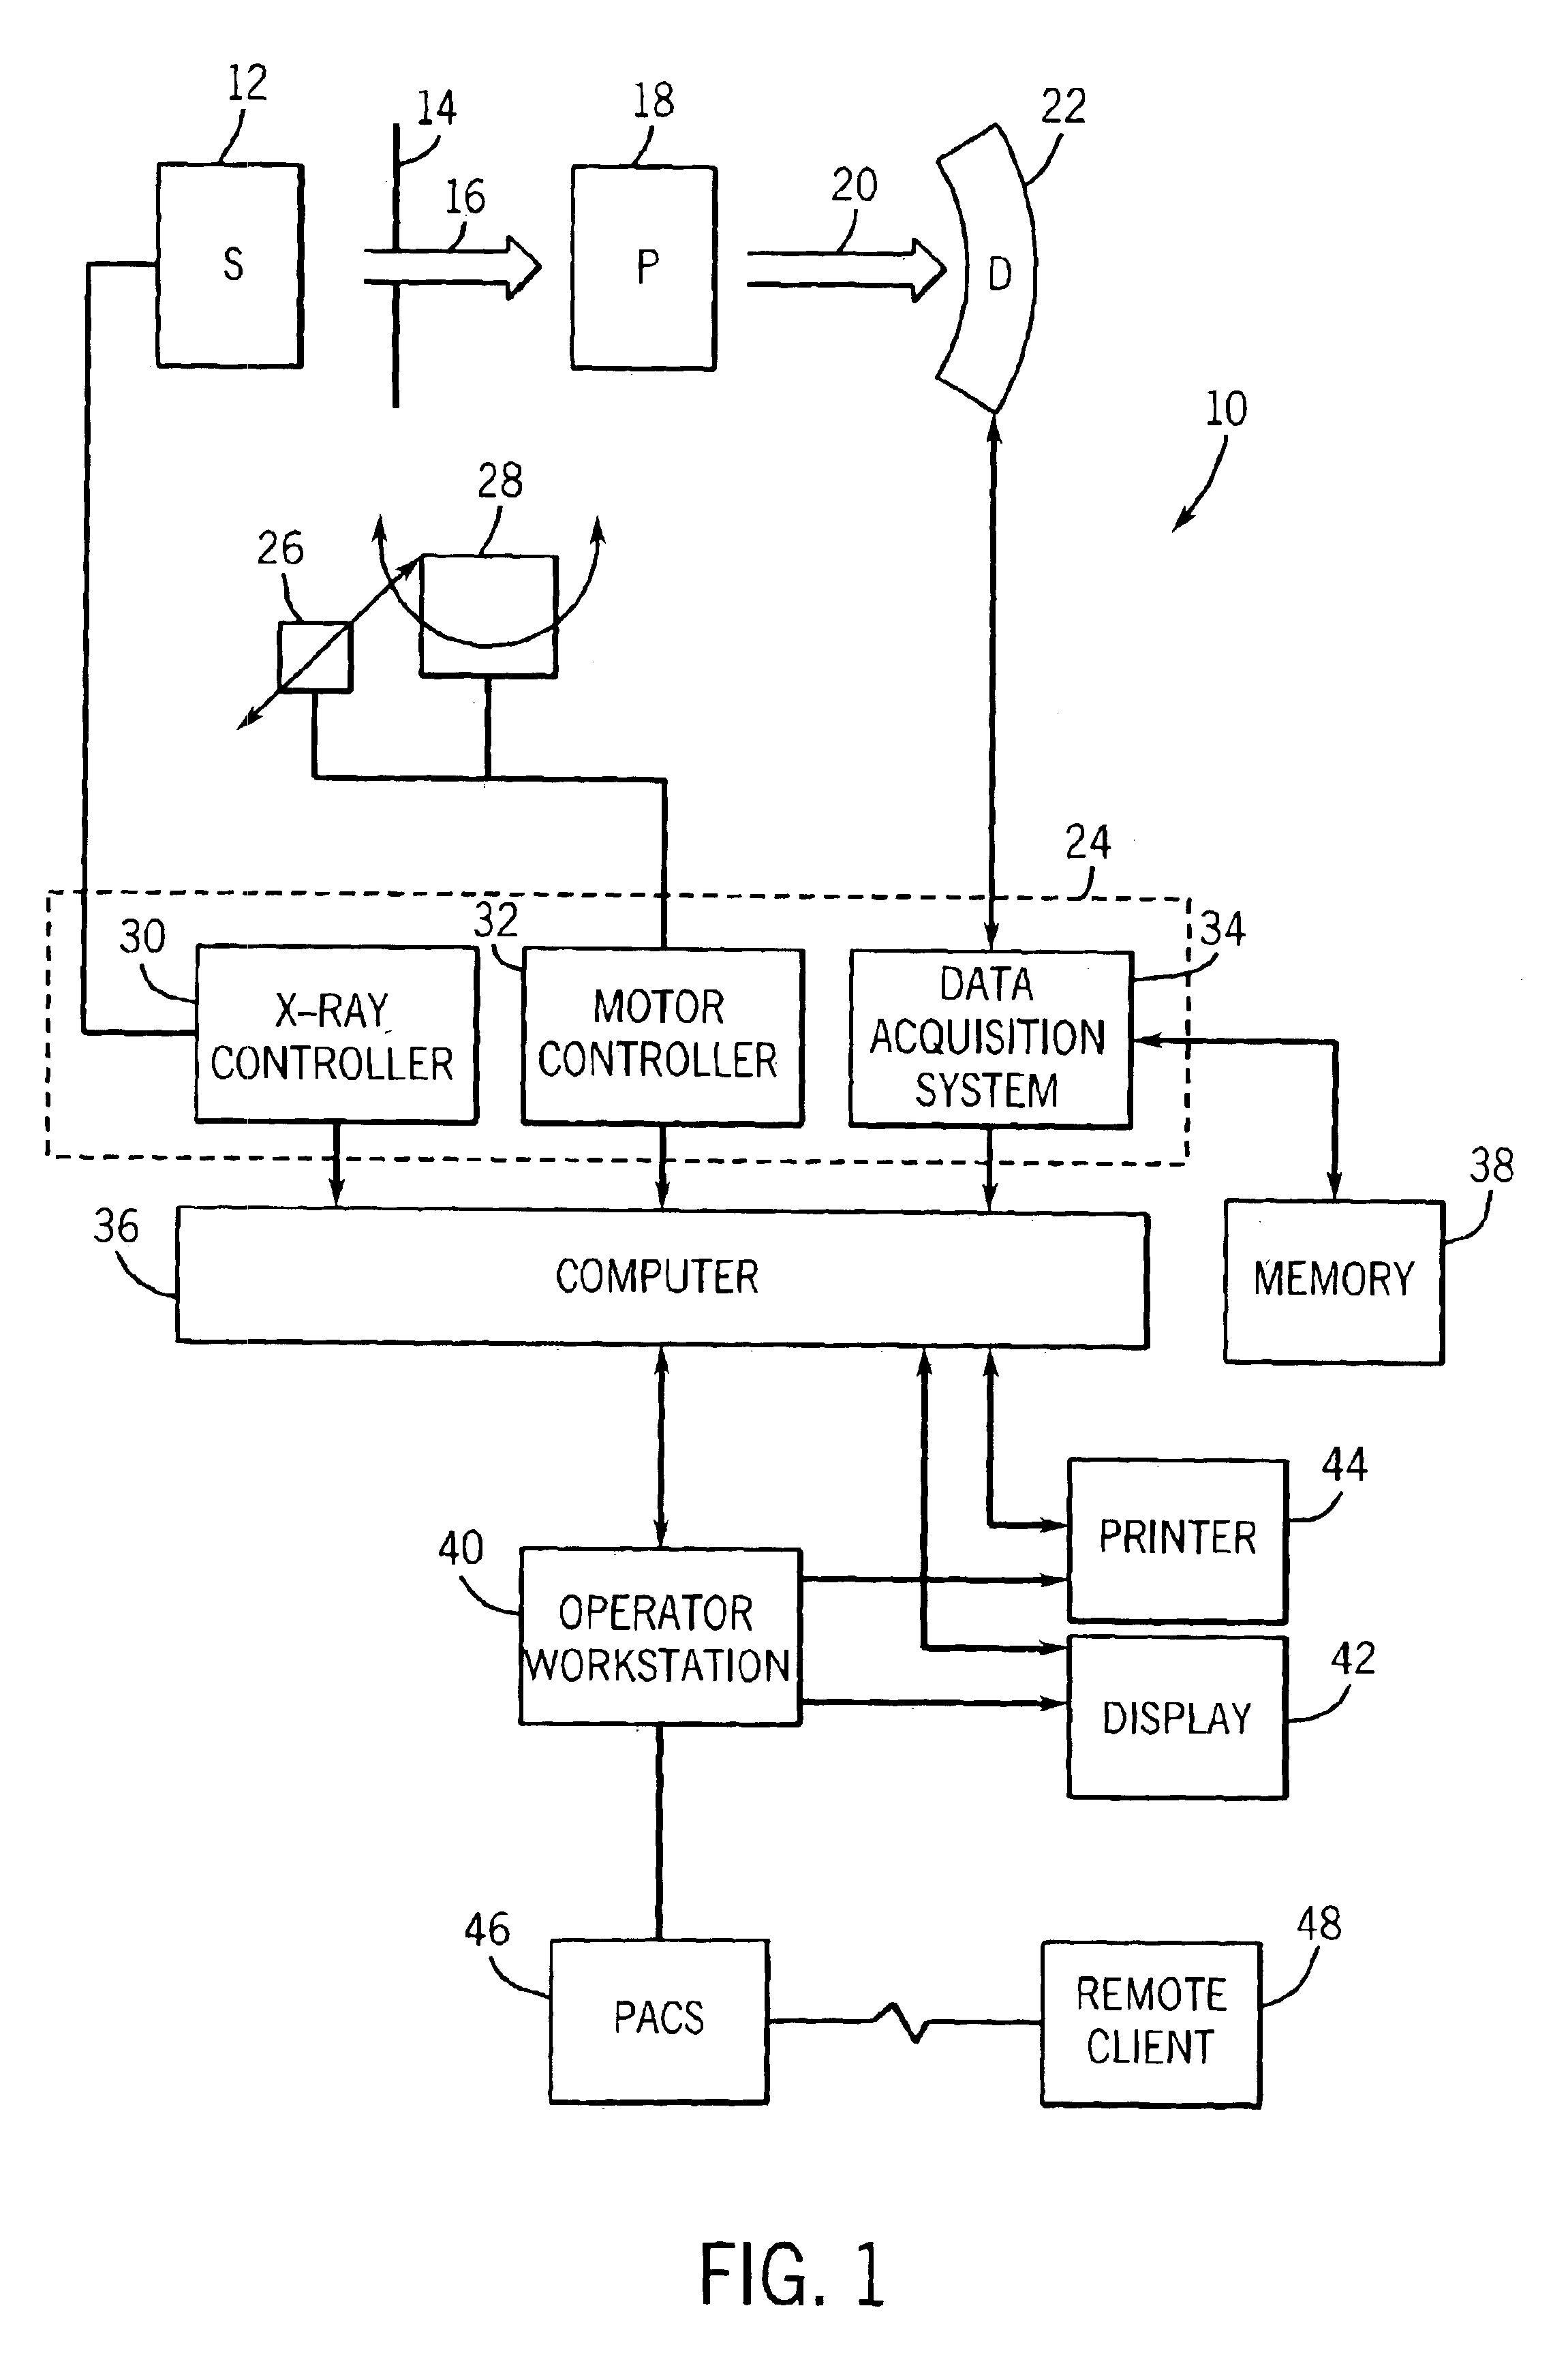 Method and apparatus for generating a density map using dual-energy CT